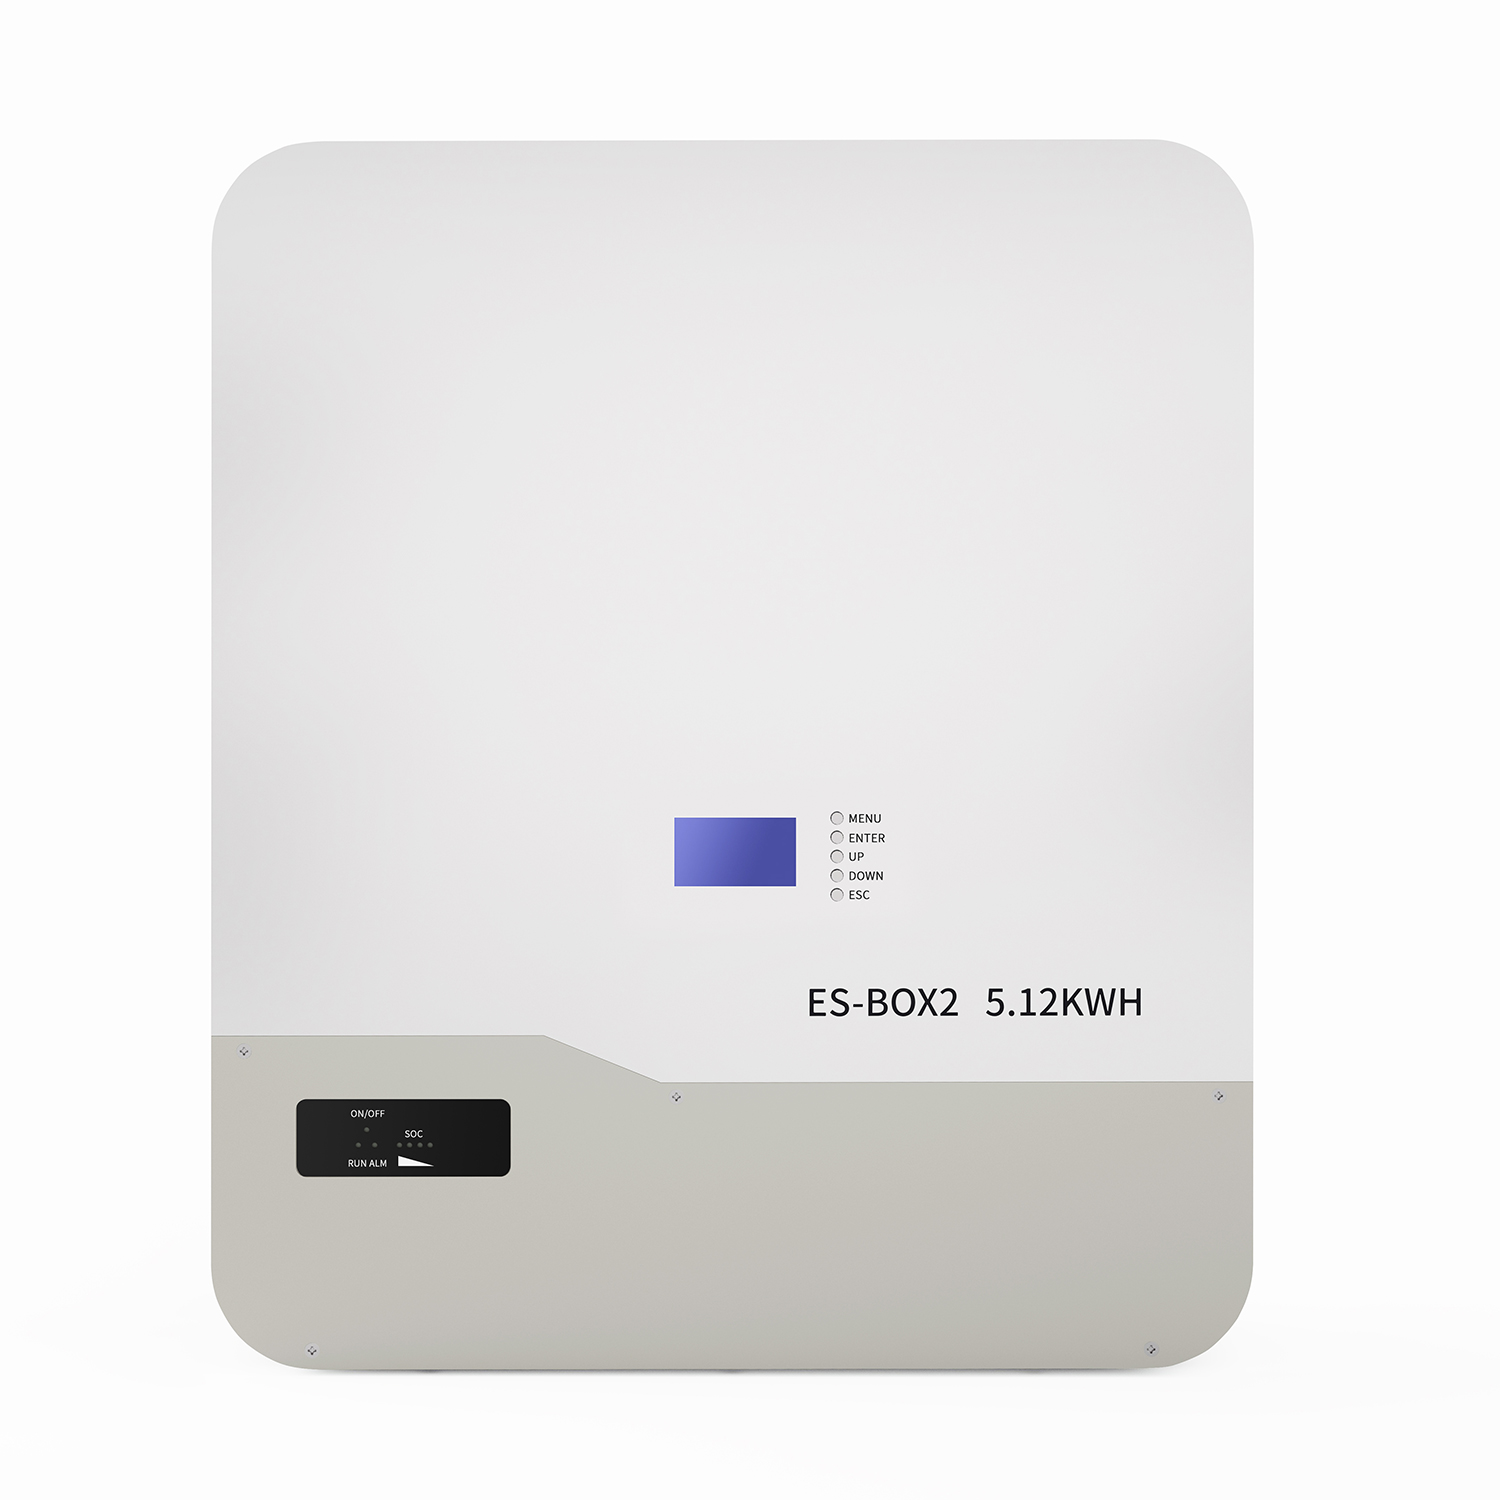 backup power for your home